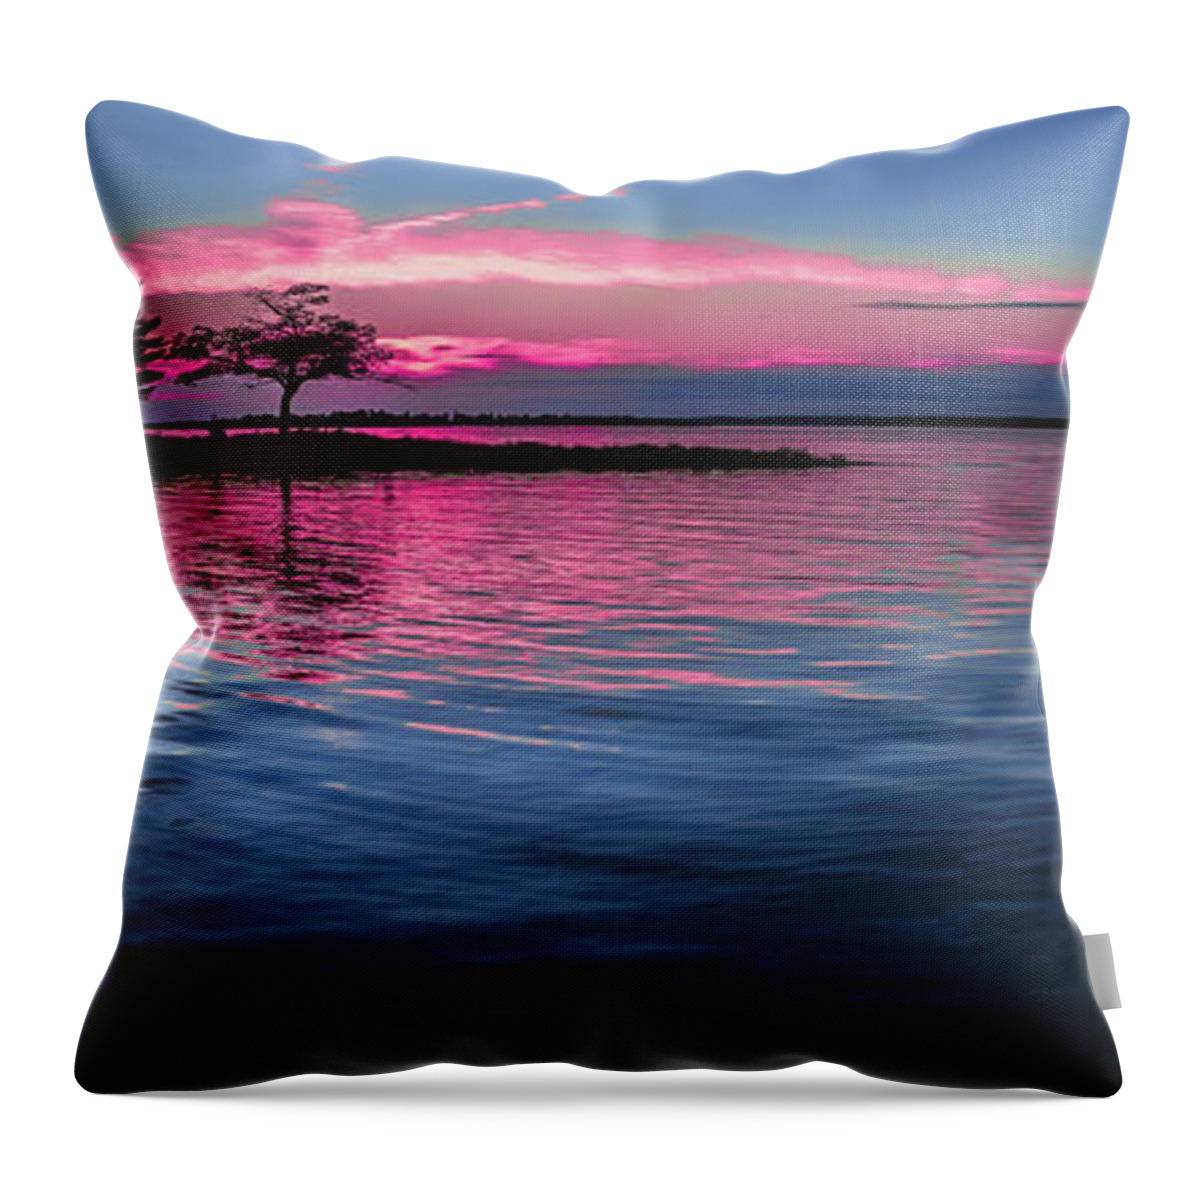 Blue Water Throw Pillow featuring the photograph My Favorite Tree by Joe Holley